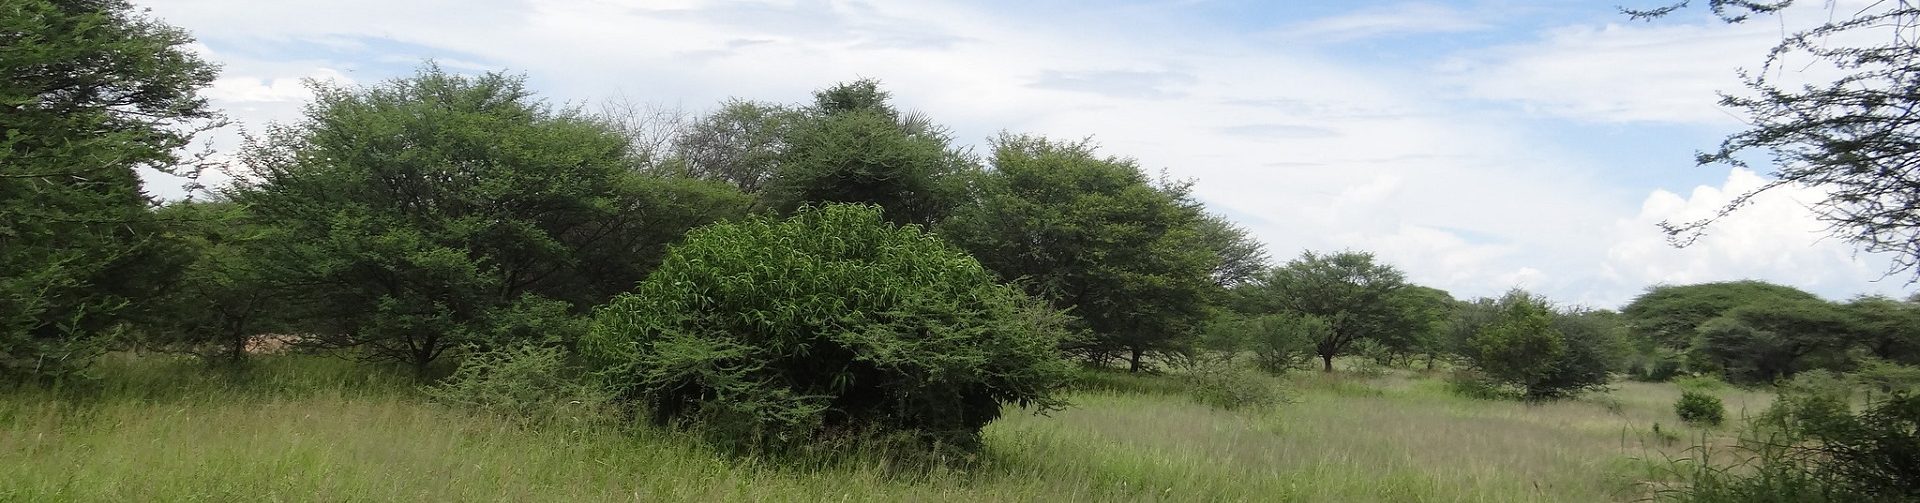 Restoring forests, restoring communities: Lessons from Shinyanga